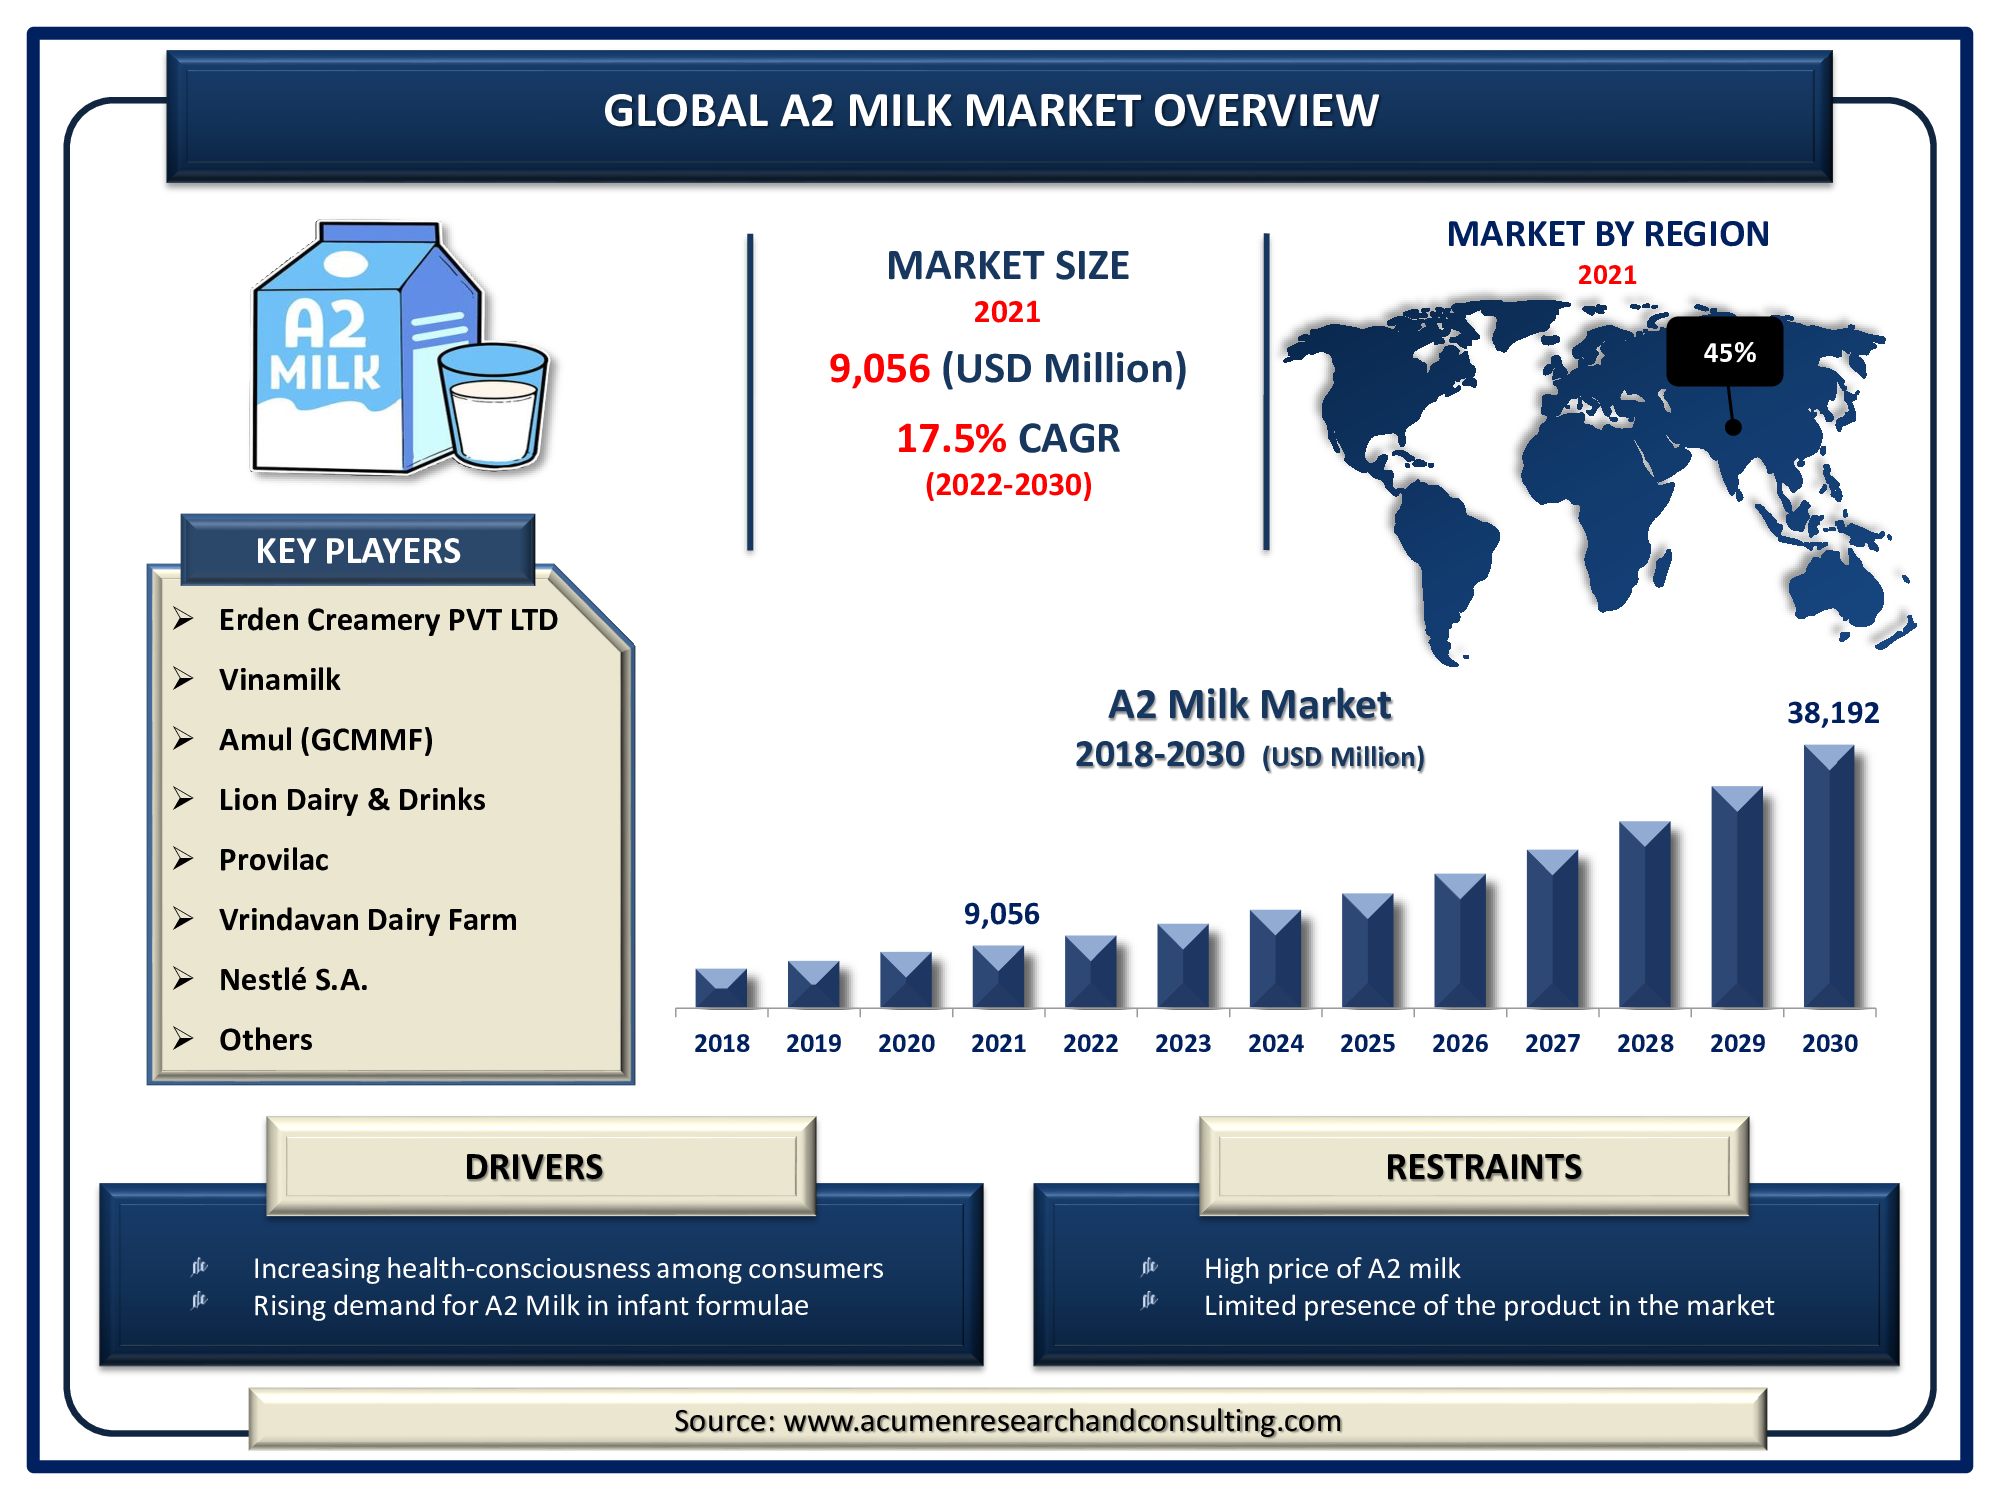 A2 Milk Market size Accounted for USD 9,056 Million in 2021 and is predicted to be worth USD 38,192 Million by 2030, with a CAGR of 17.5% during the Forthcoming Period from 2022 to 2030.